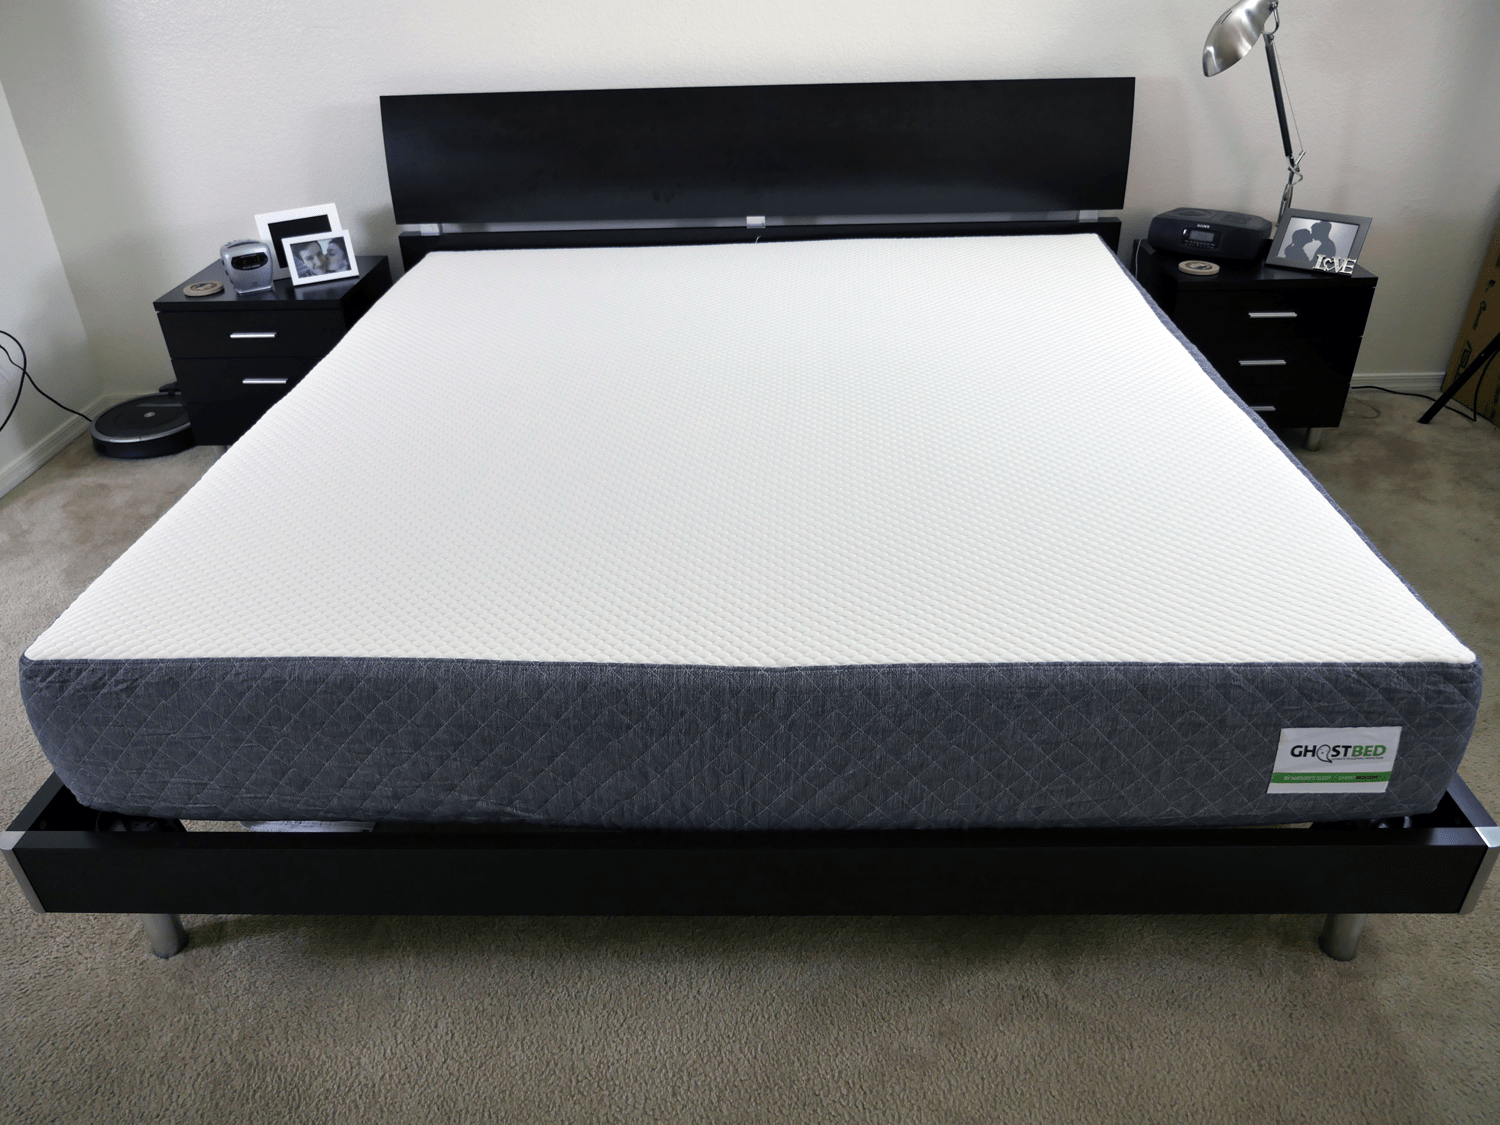 ghost bed mattress review